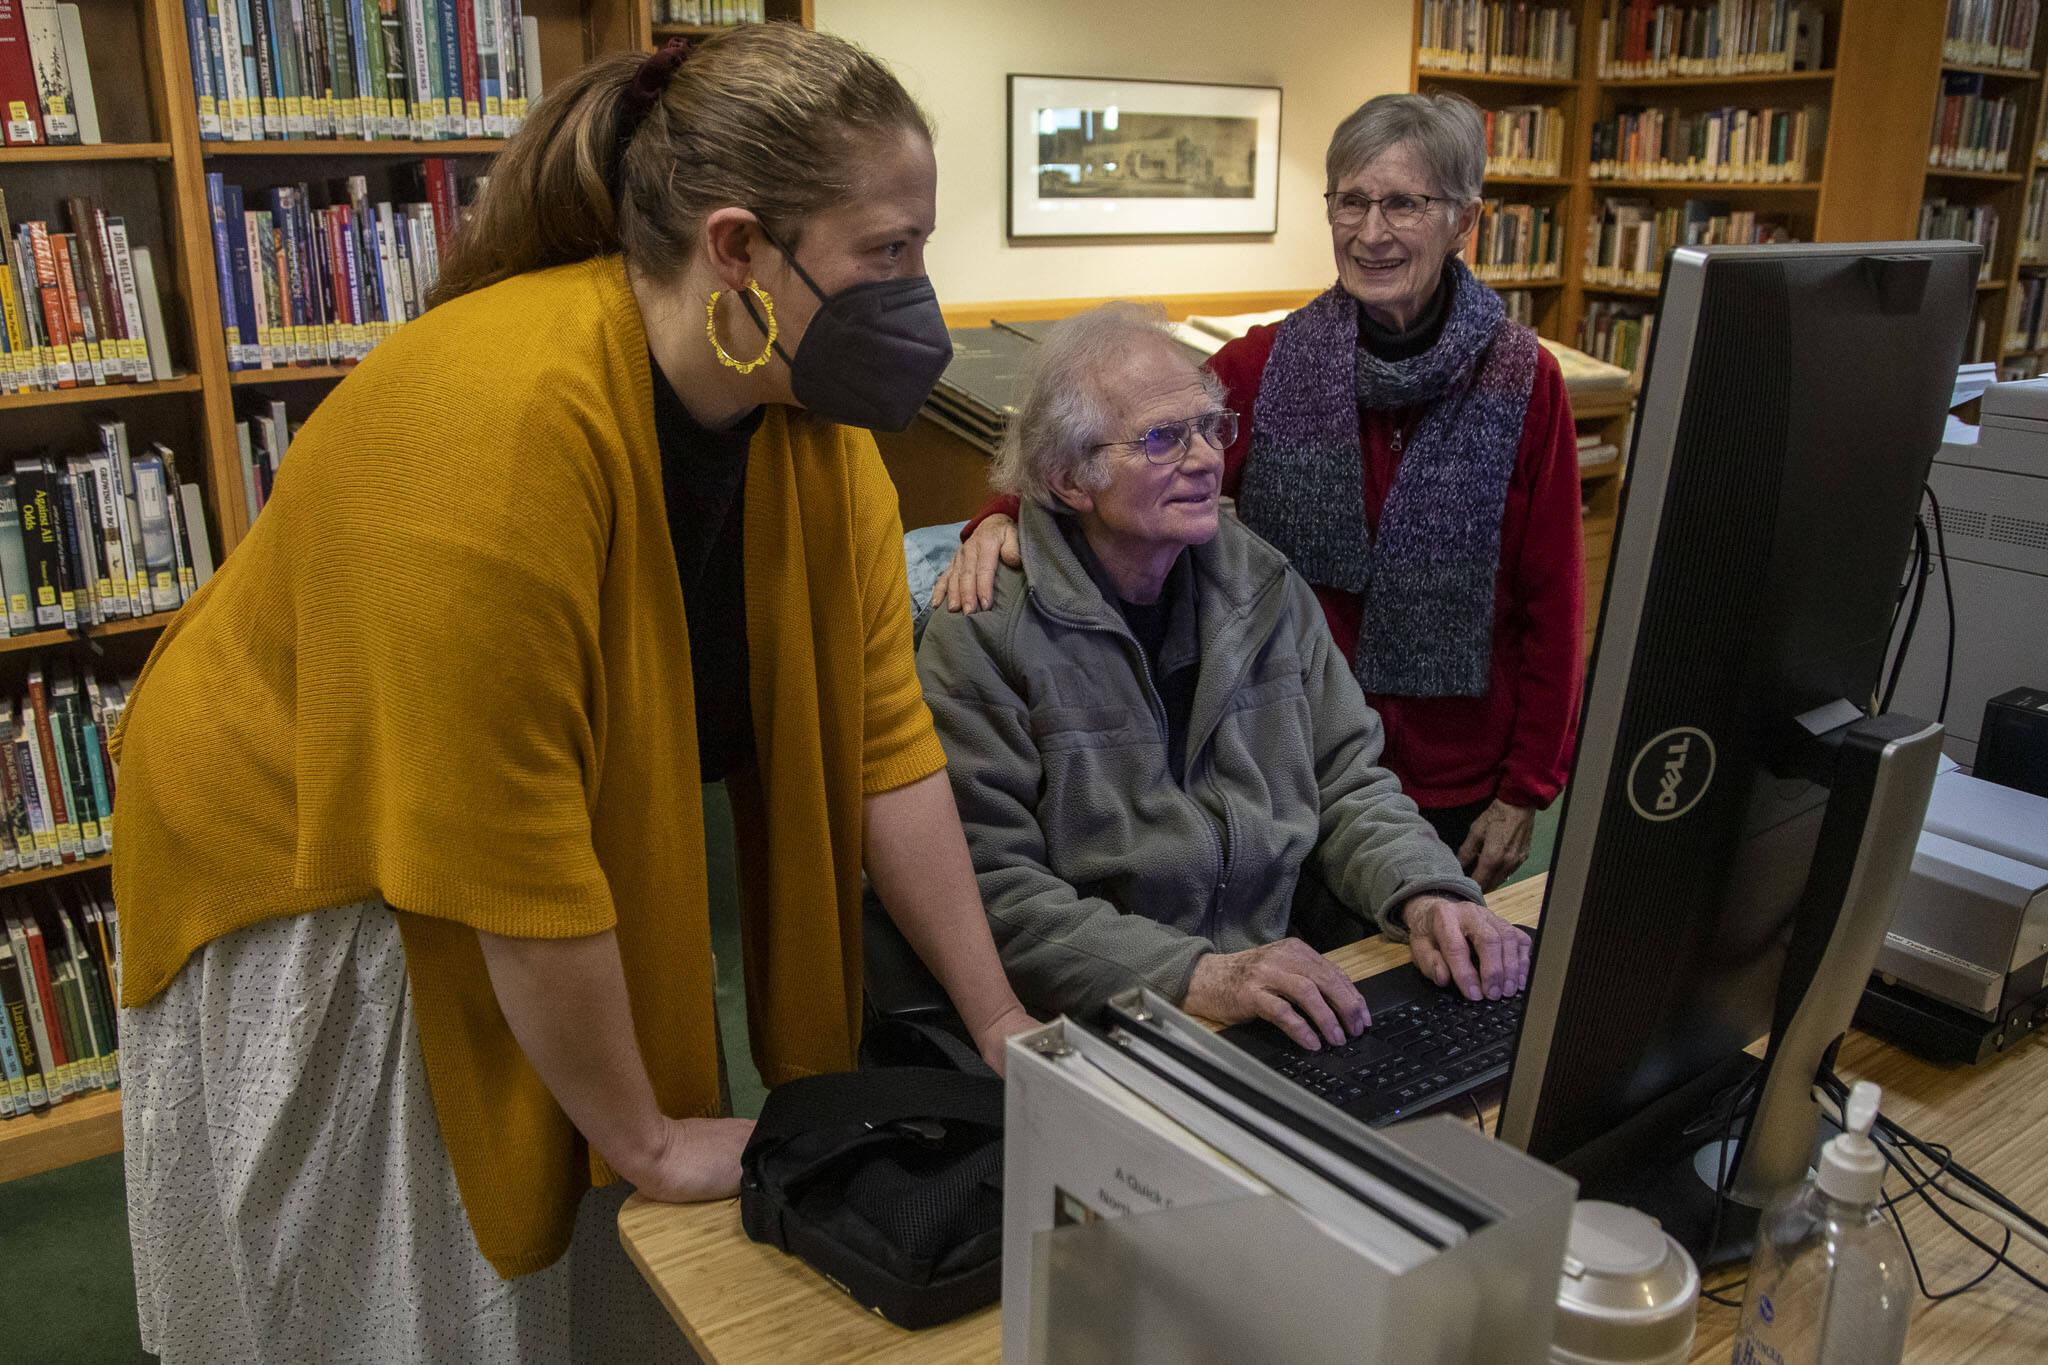 Left to right, Northwest Room Librarian Lisa Labovitch, 41, and contributors to HistoryLink, an online encyclopedia on Washington history, David Cameron, 81, and Louise Lindgren, 79, pose for a photo on Jan. 19, at the Everett Public Library. (Annie Barker / The Herald)